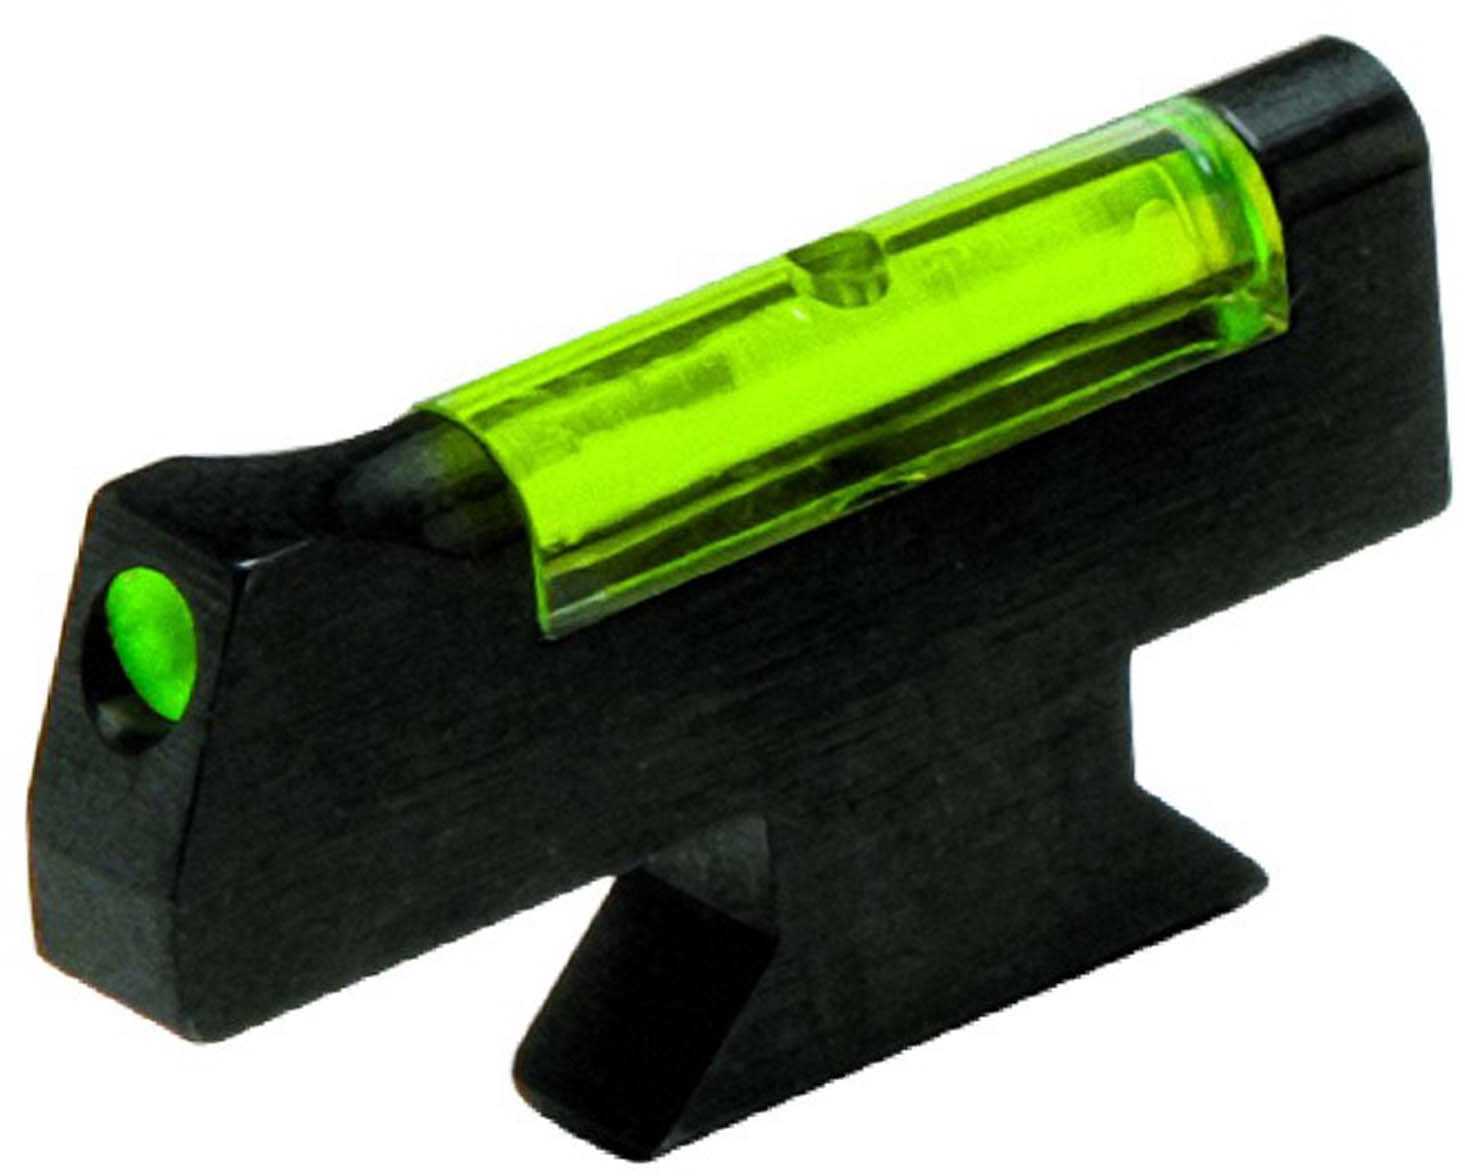 HiViz Sight Systems S&W Revolvers with Interchangeable Front Sights Green Only SW3003-G